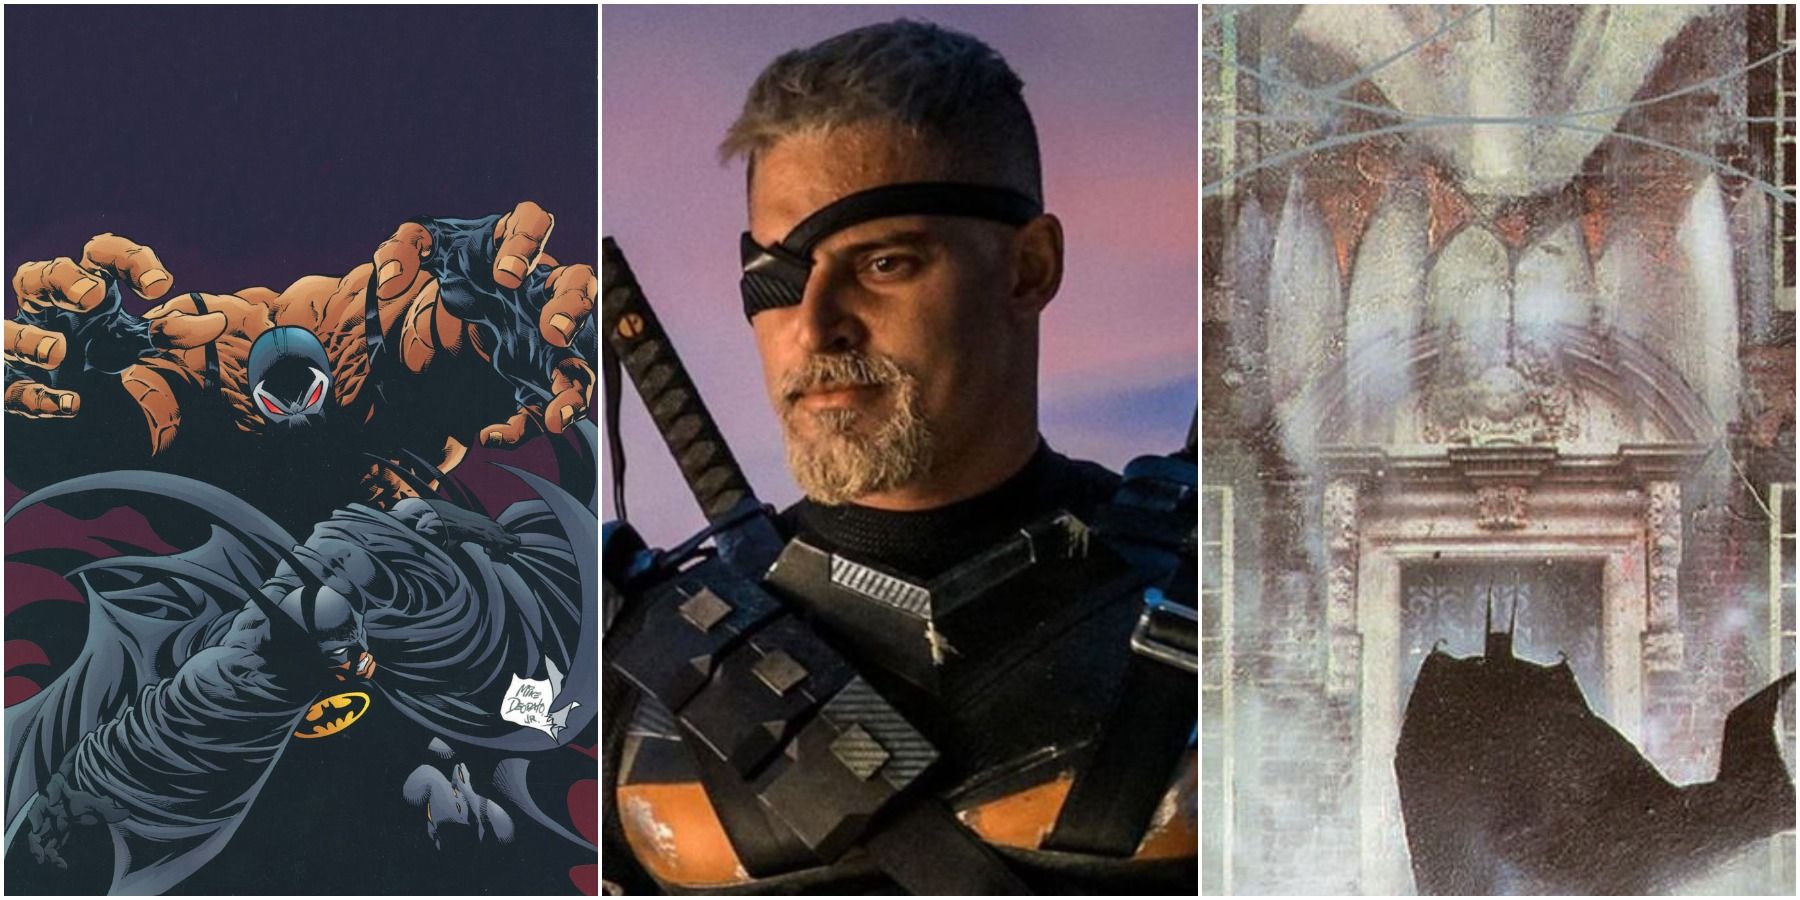 The iconic Knightfall comic book arc, Joe Mangiello's Deathstroke in Justice League and the haunting Arkham Asylum: A Serious House on Serious Earth comic